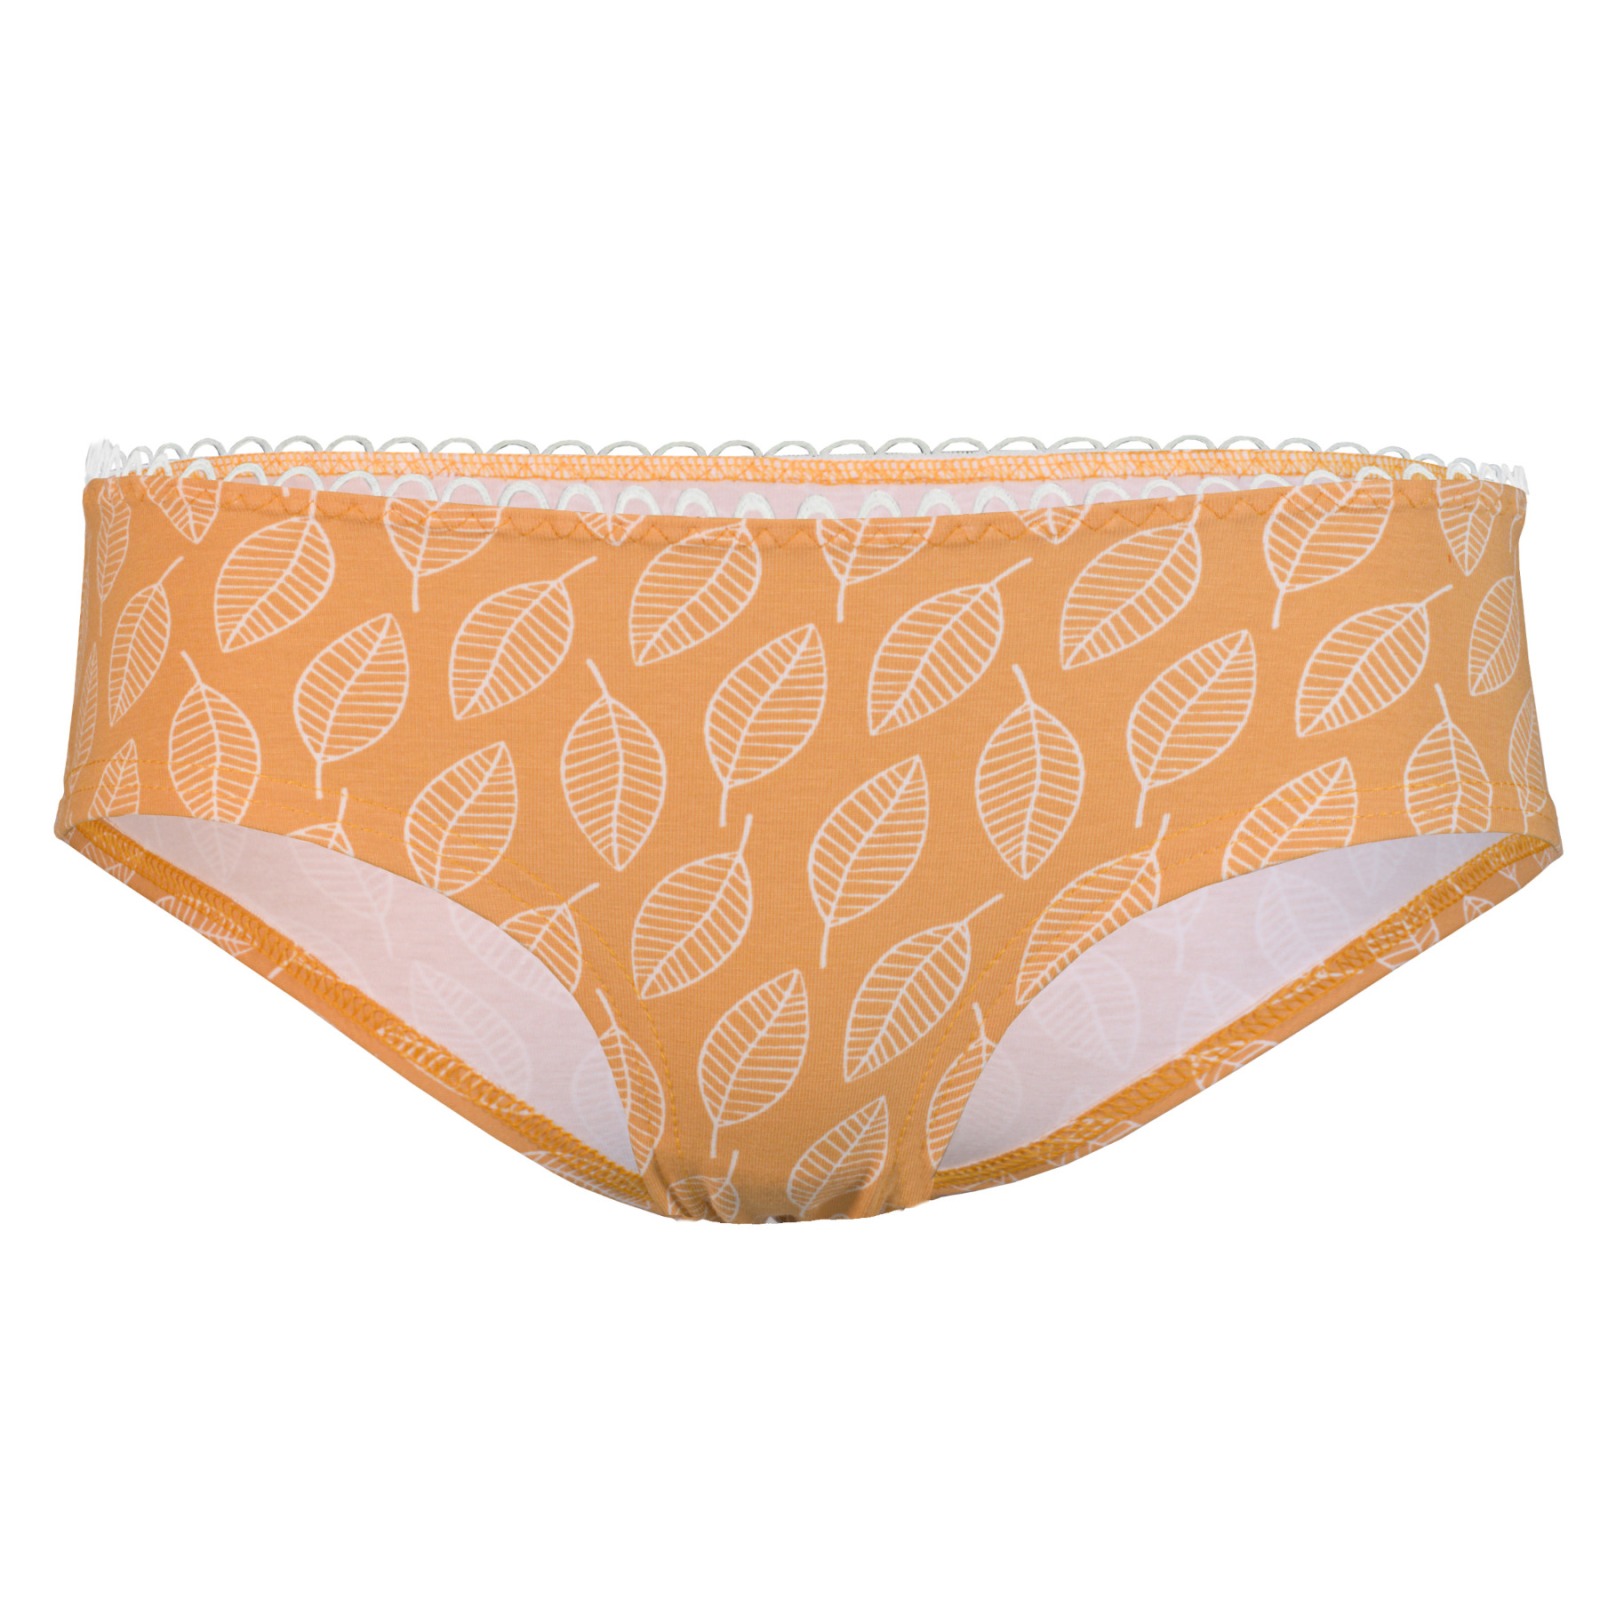 Bio hipster panties Muster Blaetter curry yellow